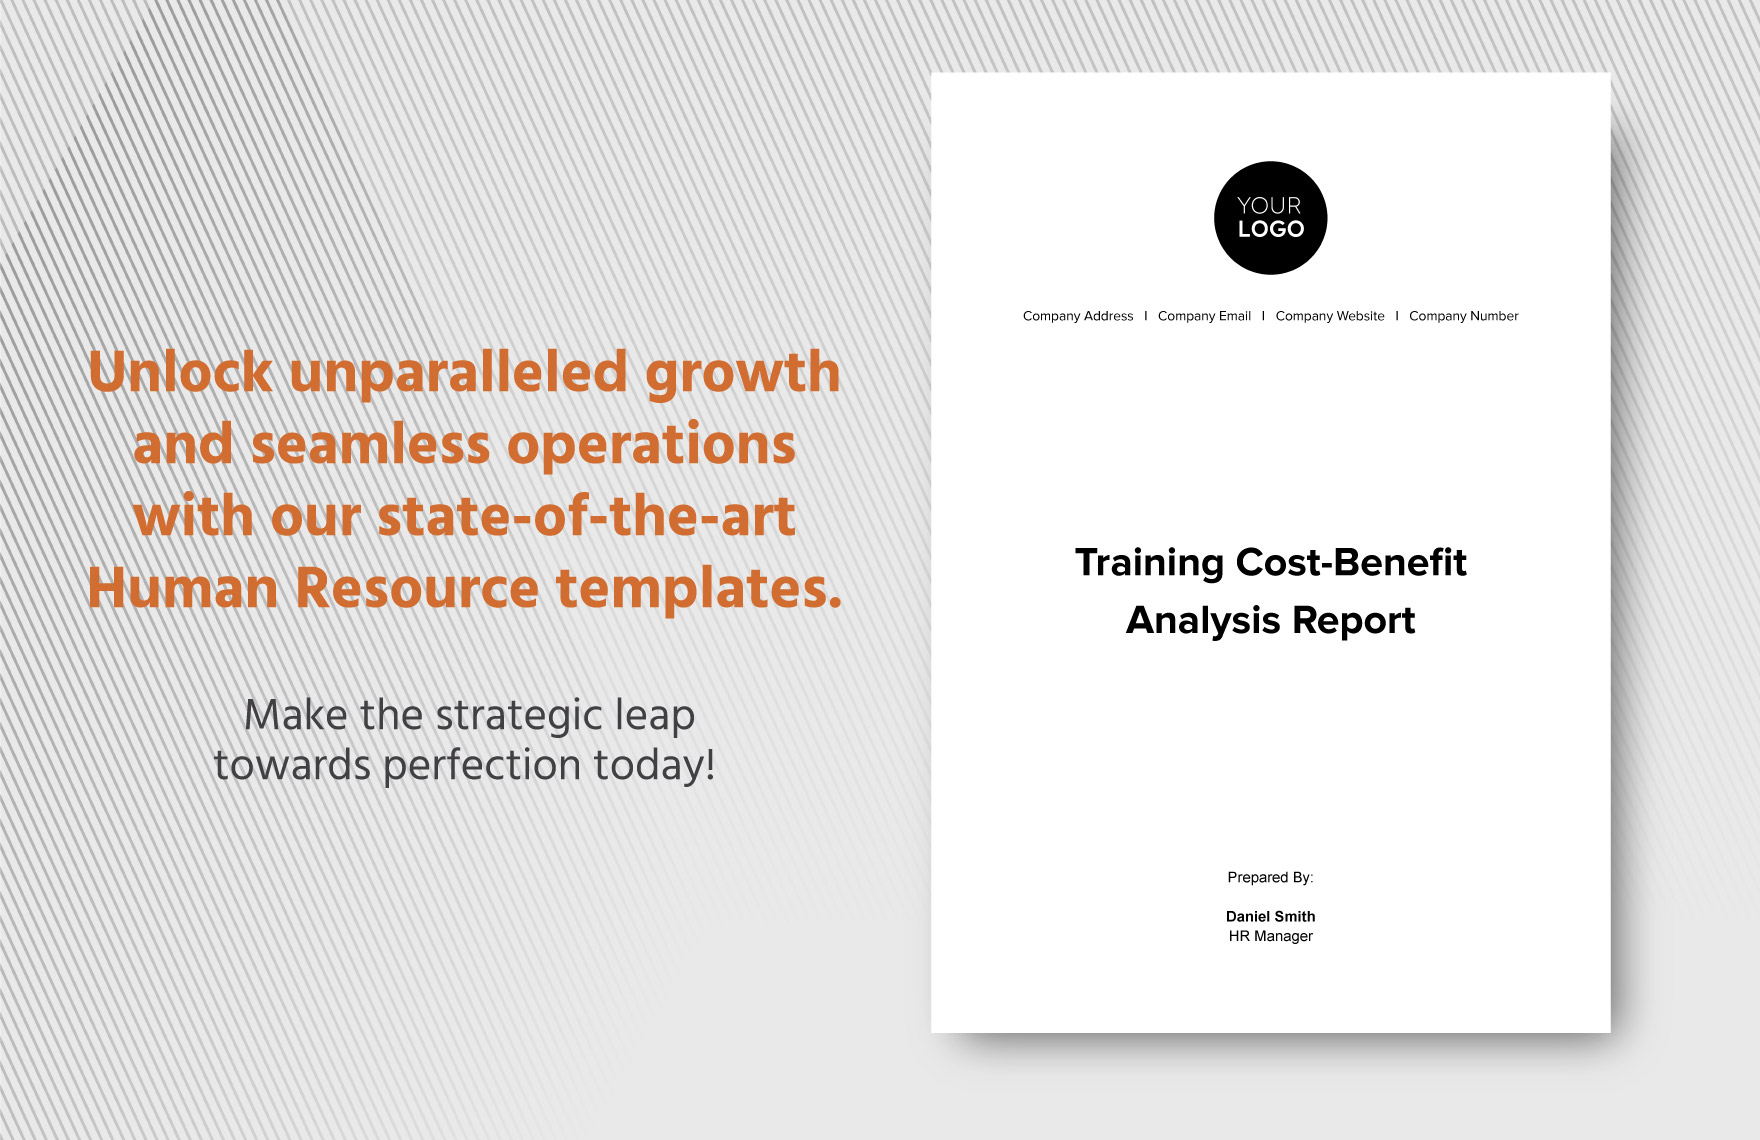 Training Cost-Benefit Analysis Report HR Template